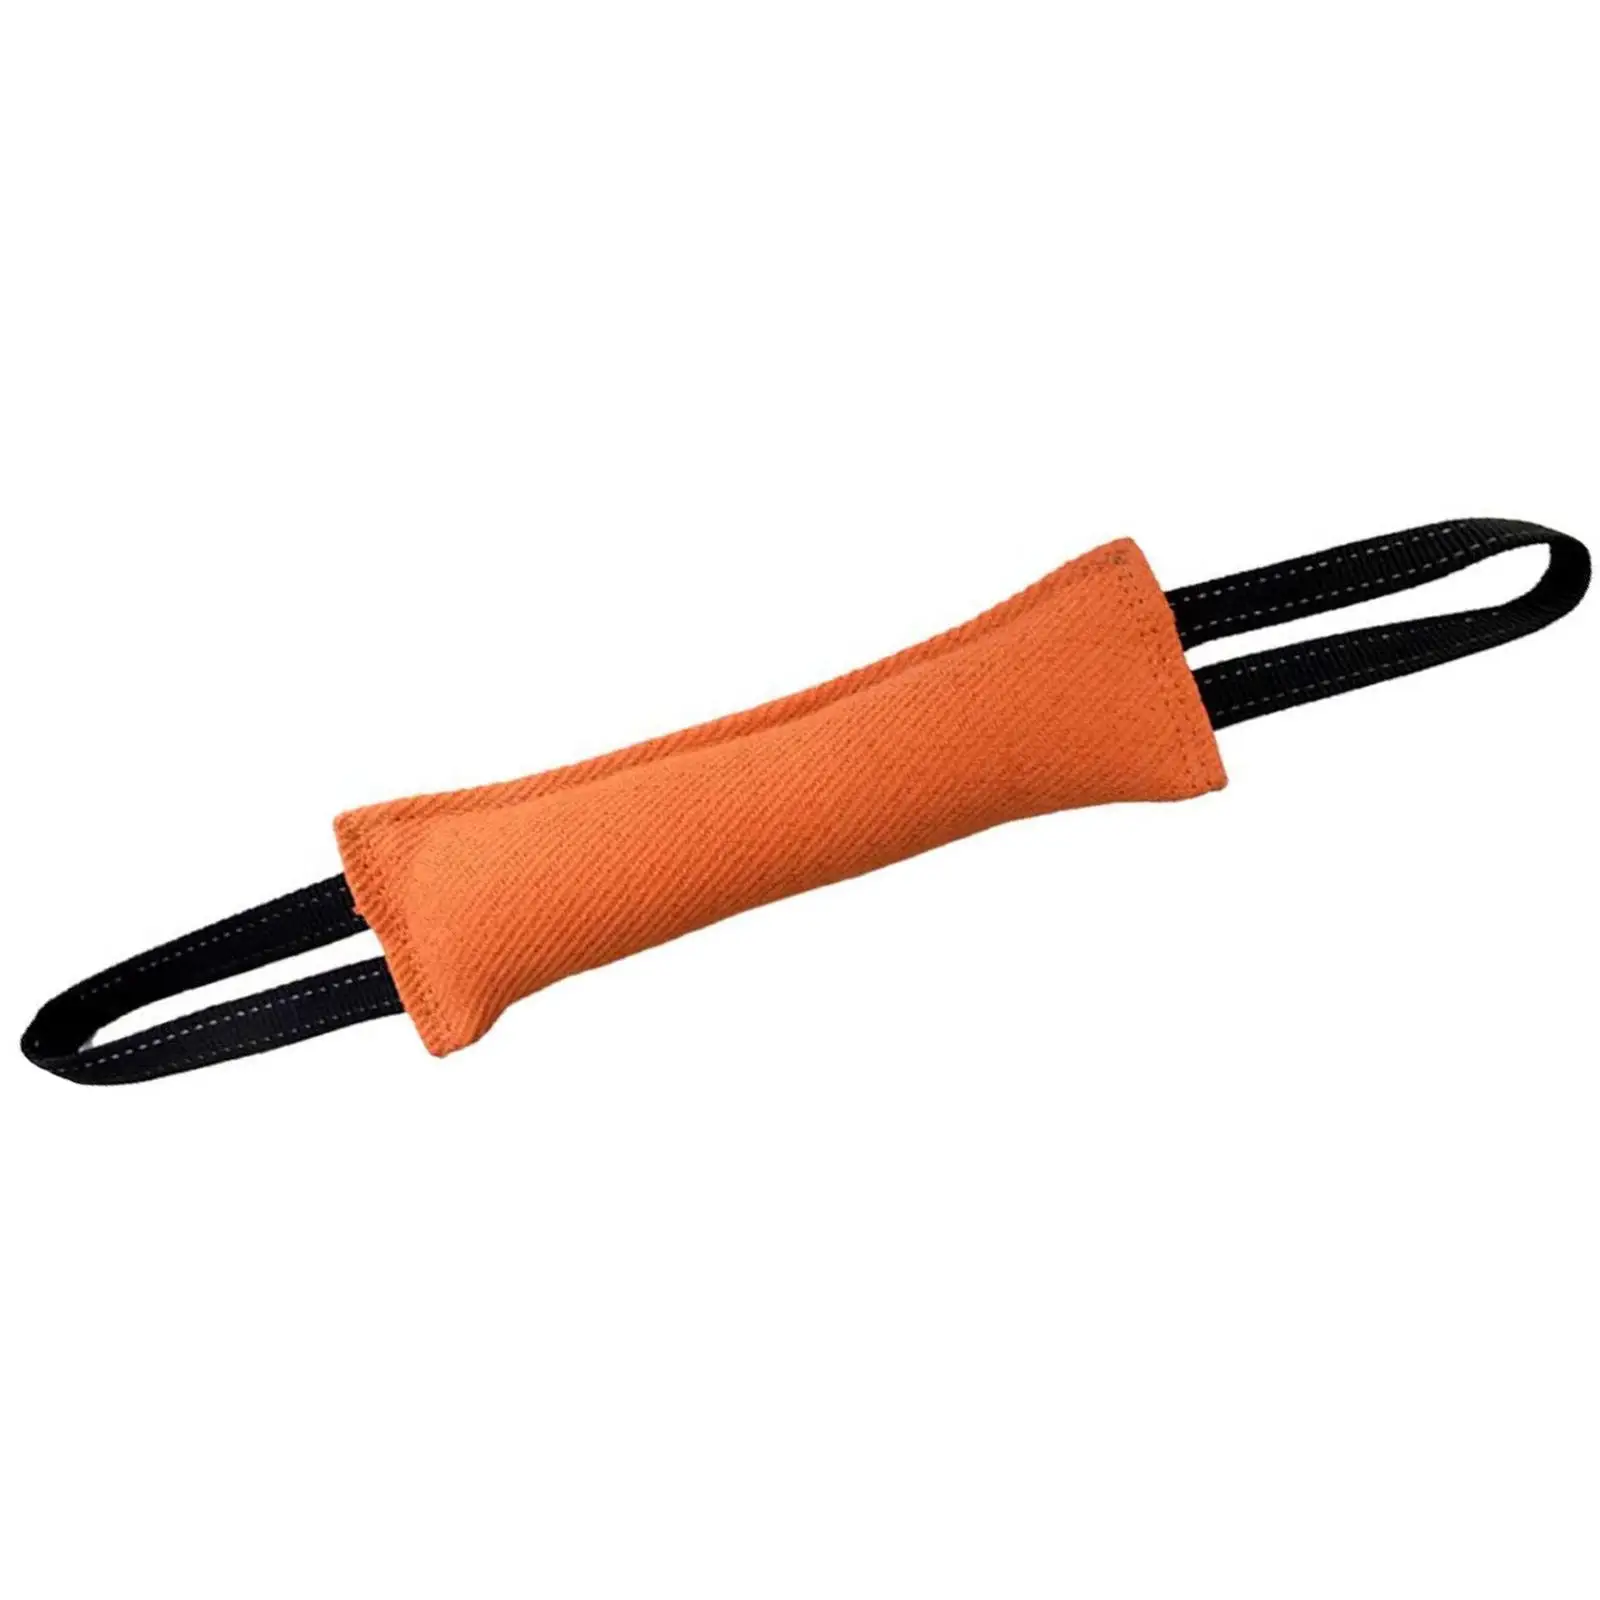 Dog Bite Tug Toy Biting Resistant 2 Handles Durable Rope Chew Toy for German Priest Pitbull Aggressive Chewers Puppy Tug of War